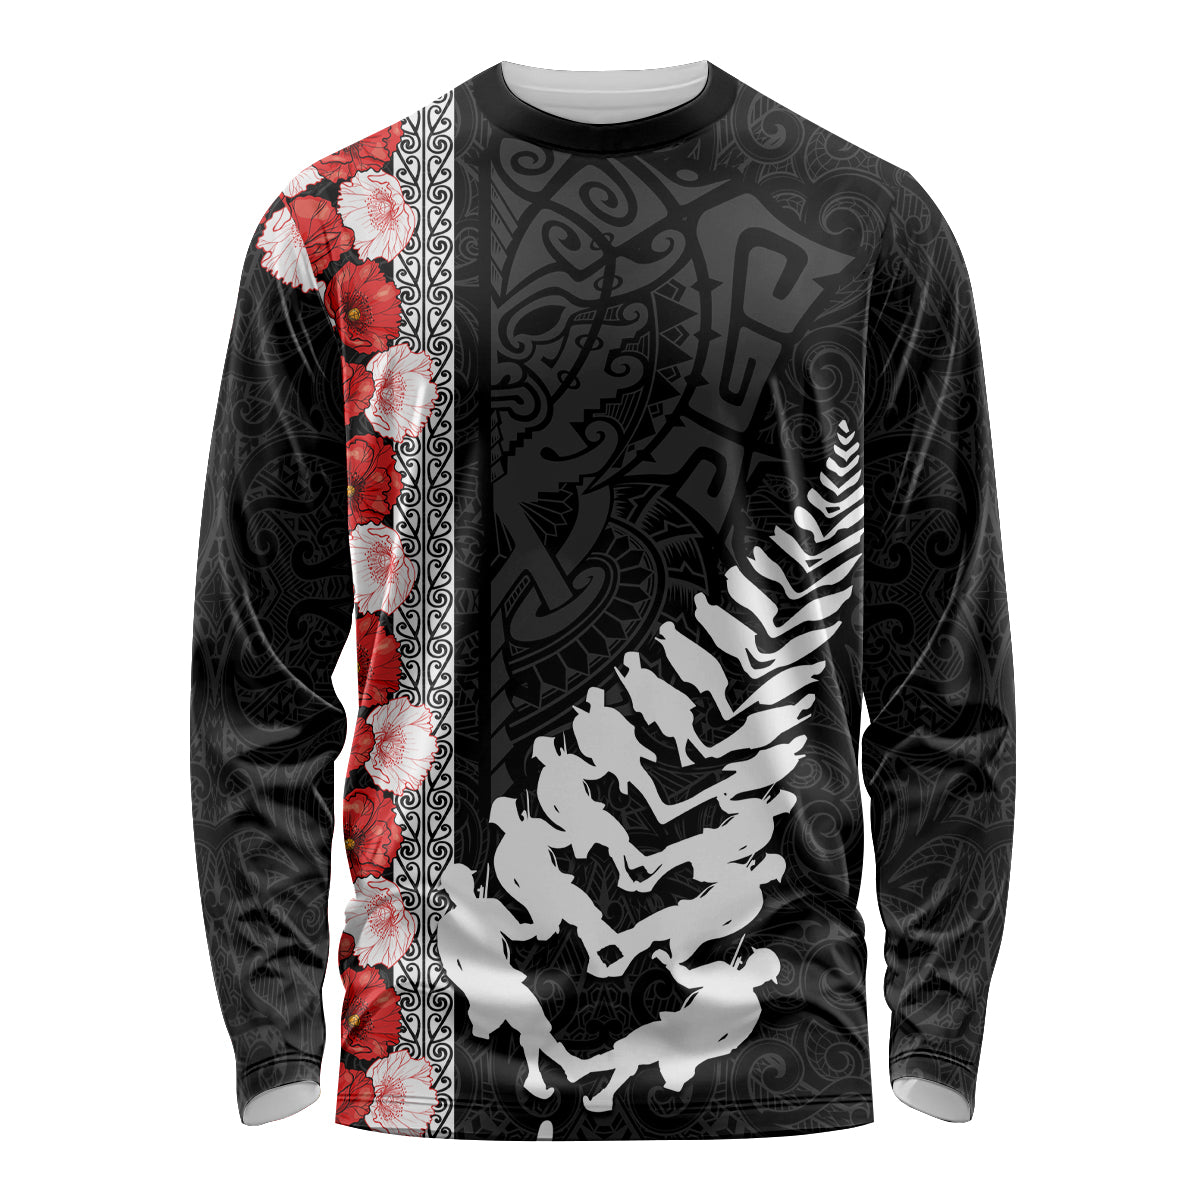 New Zealand ANZAC Day Long Sleeve Shirt Soldier Silver Fern with Red Poppies Flower Maori Style LT03 Unisex Black - Polynesian Pride